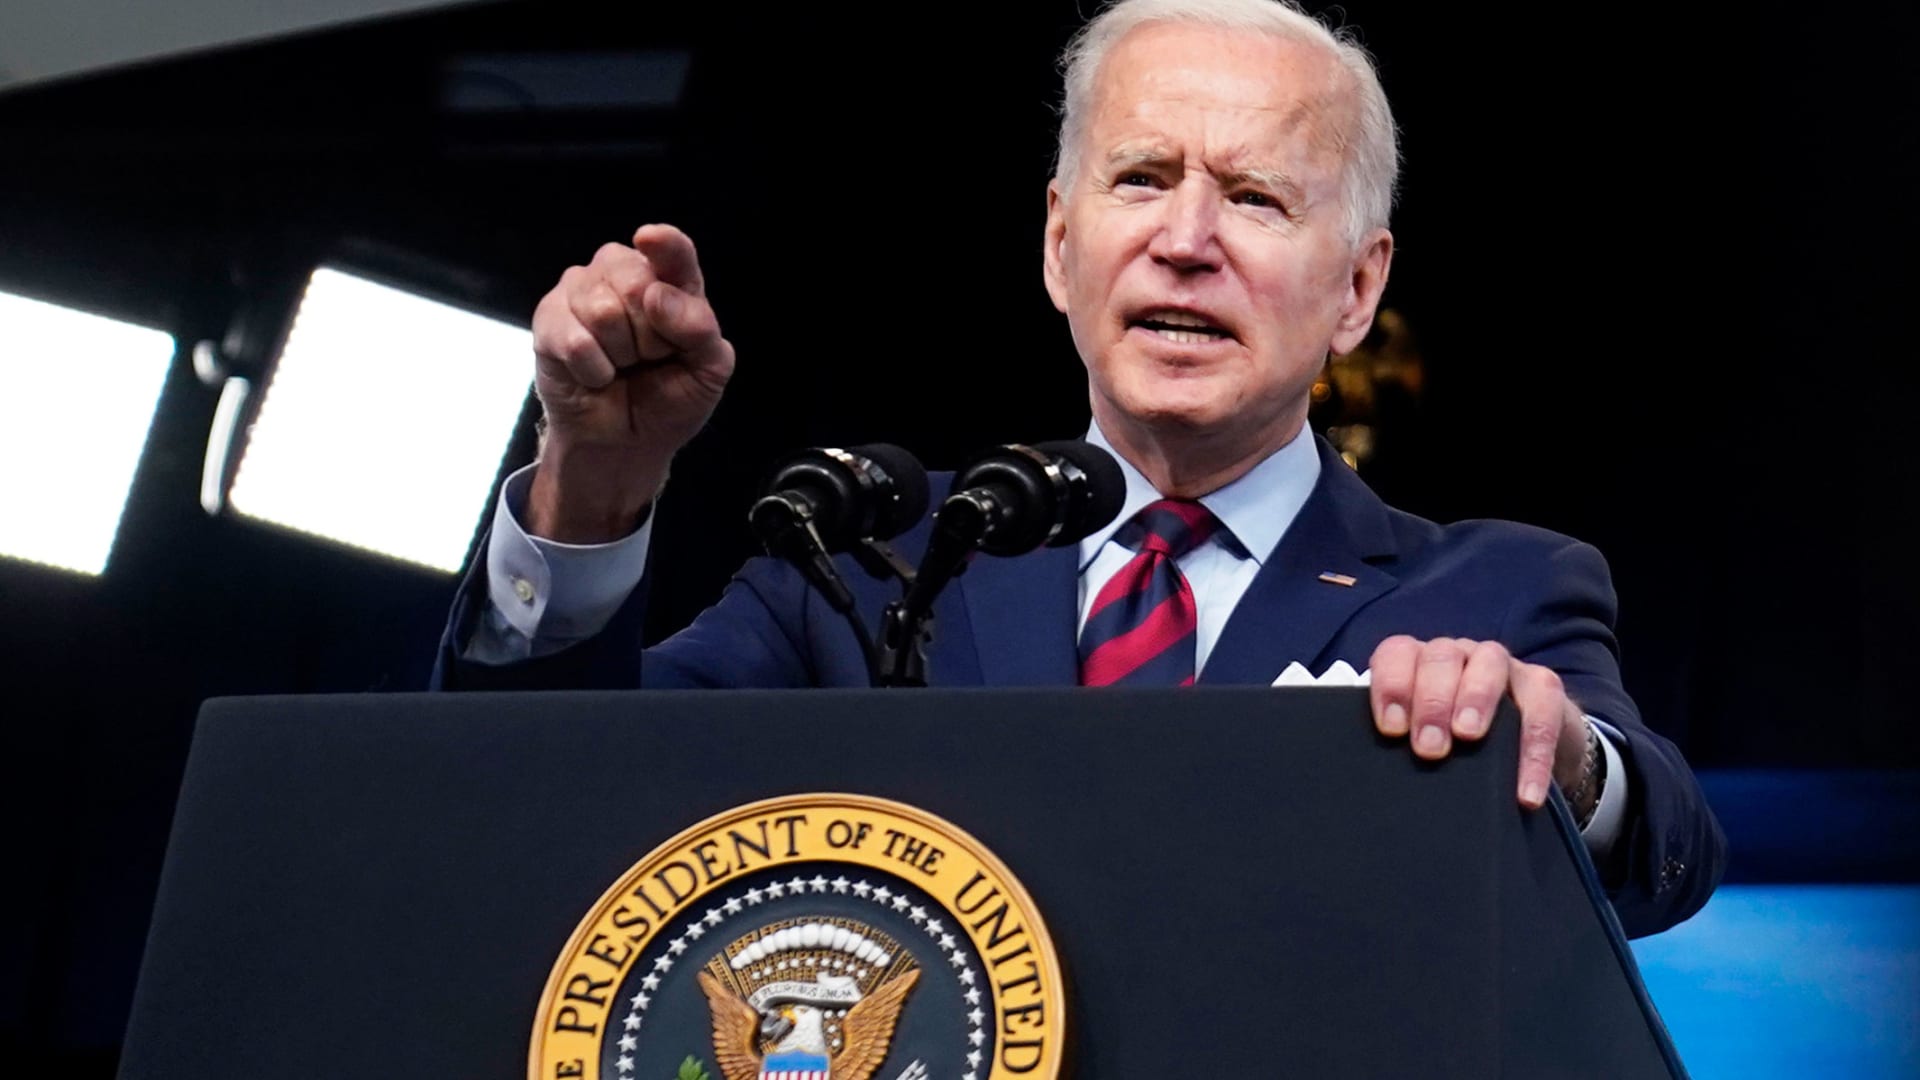 President Joe Biden speaks during an event on the American Jobs Plan in the South Court Auditorium on the White House campus, Wednesday, April 7, 2021, in Washington.